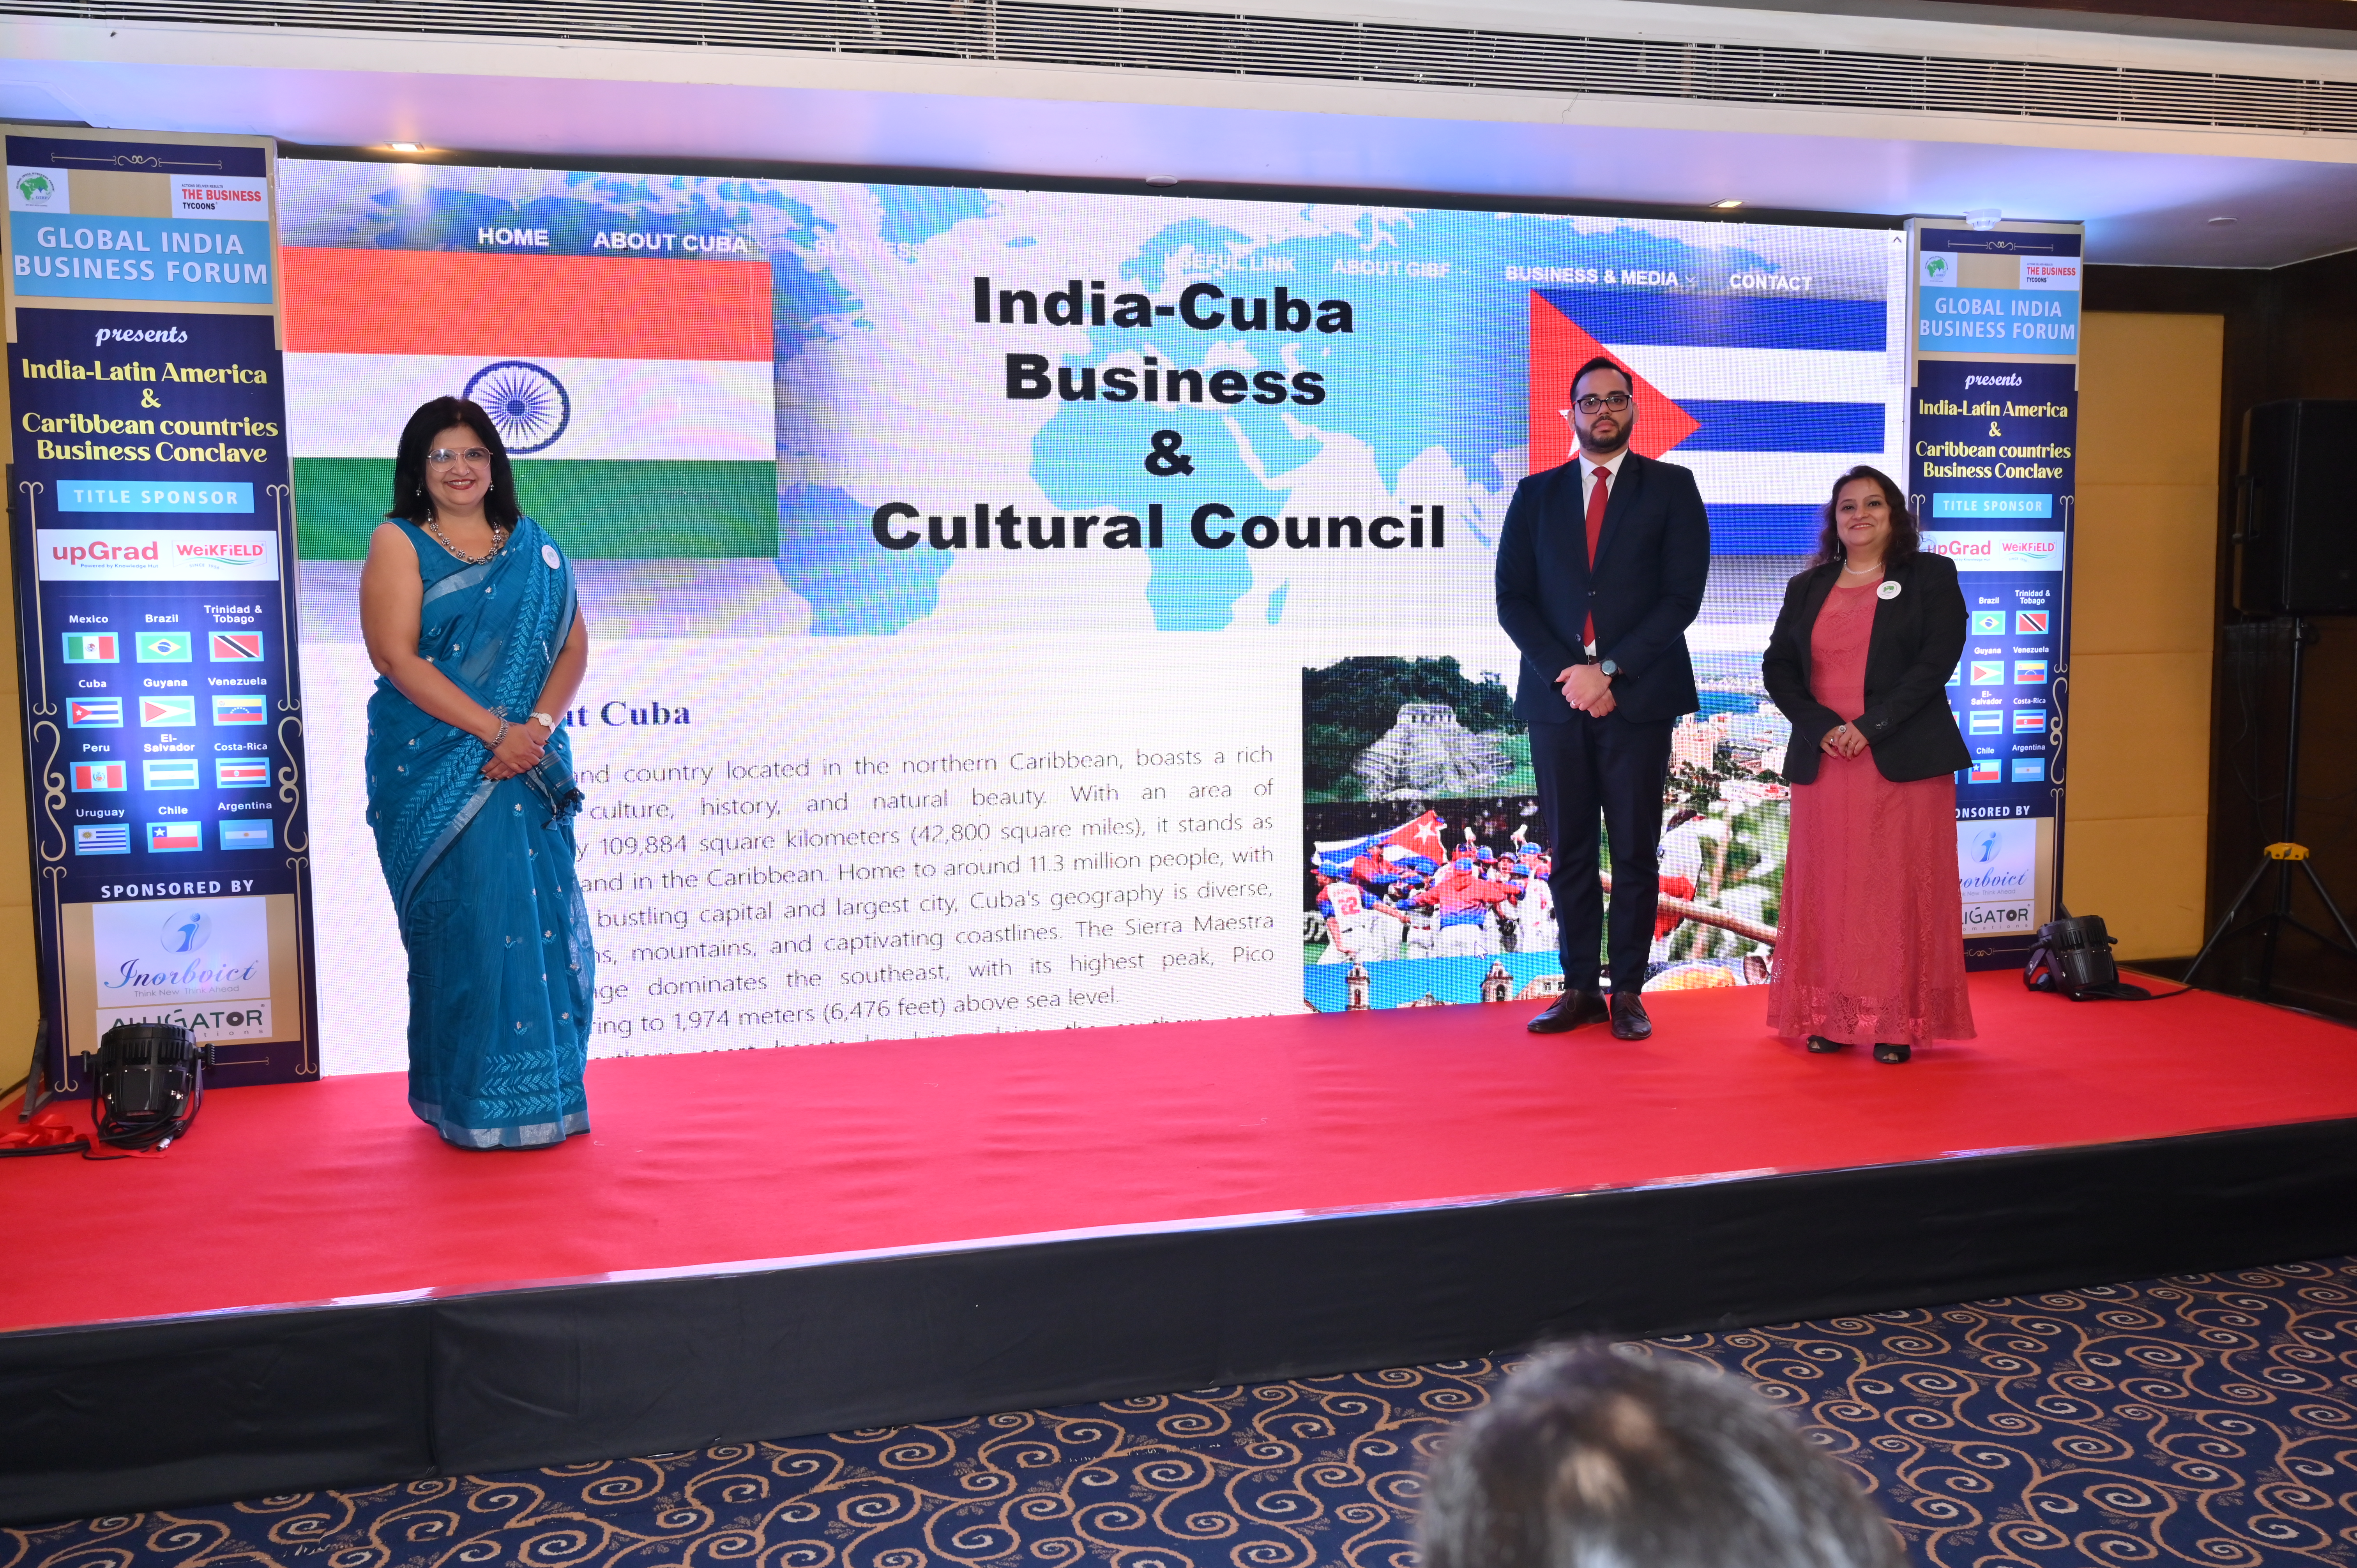 gibf-past-event-india-latin-america-and-caribbean-country-business-conclave-cuba-website-of-india-cuba-business-and-cultural-council-2024